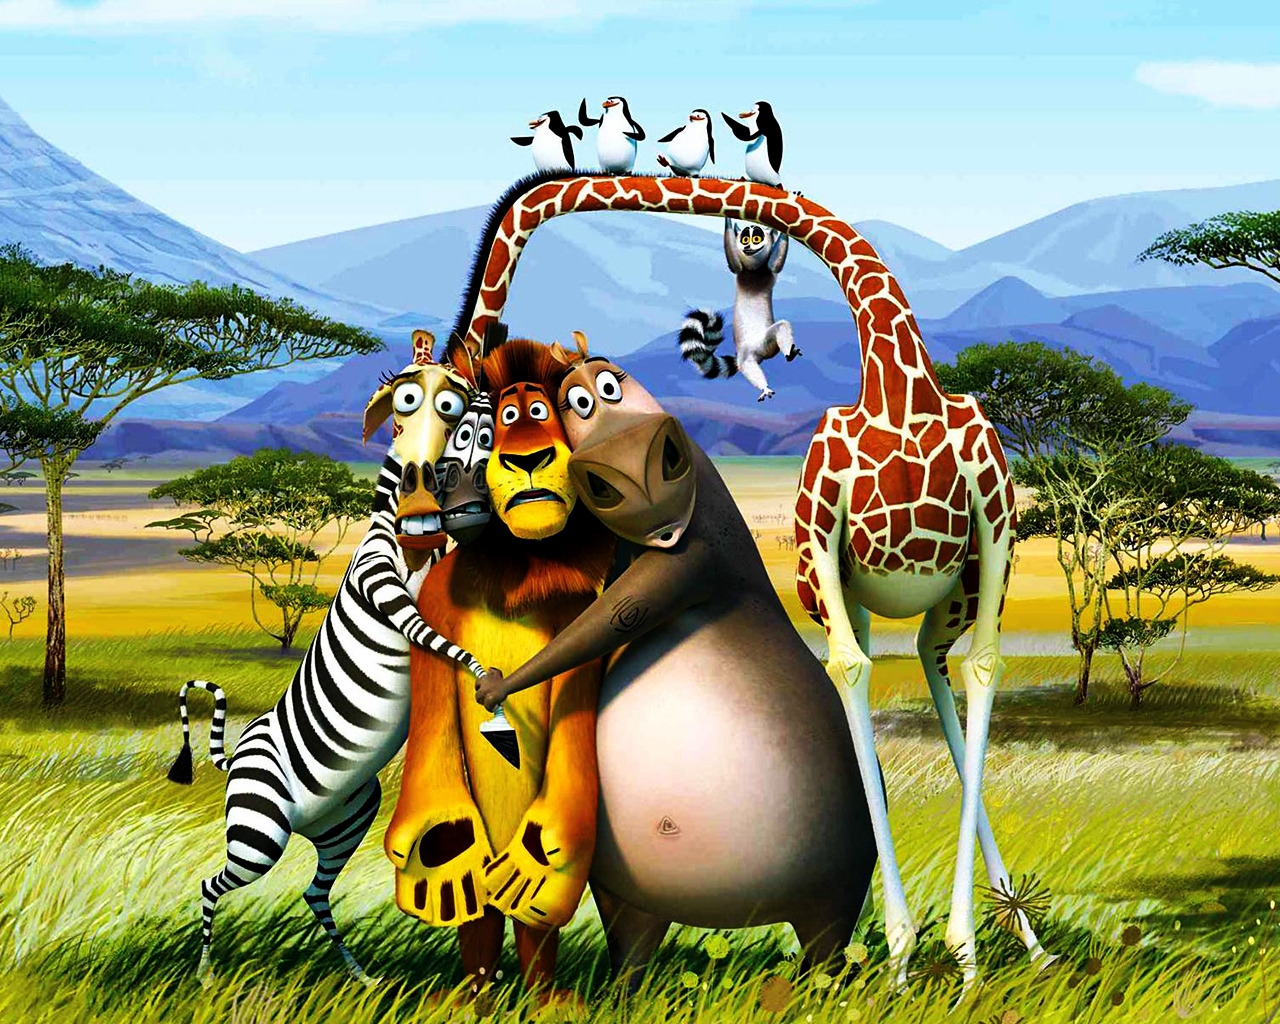 Madagascar 3 Poster for 1280 x 1024 resolution